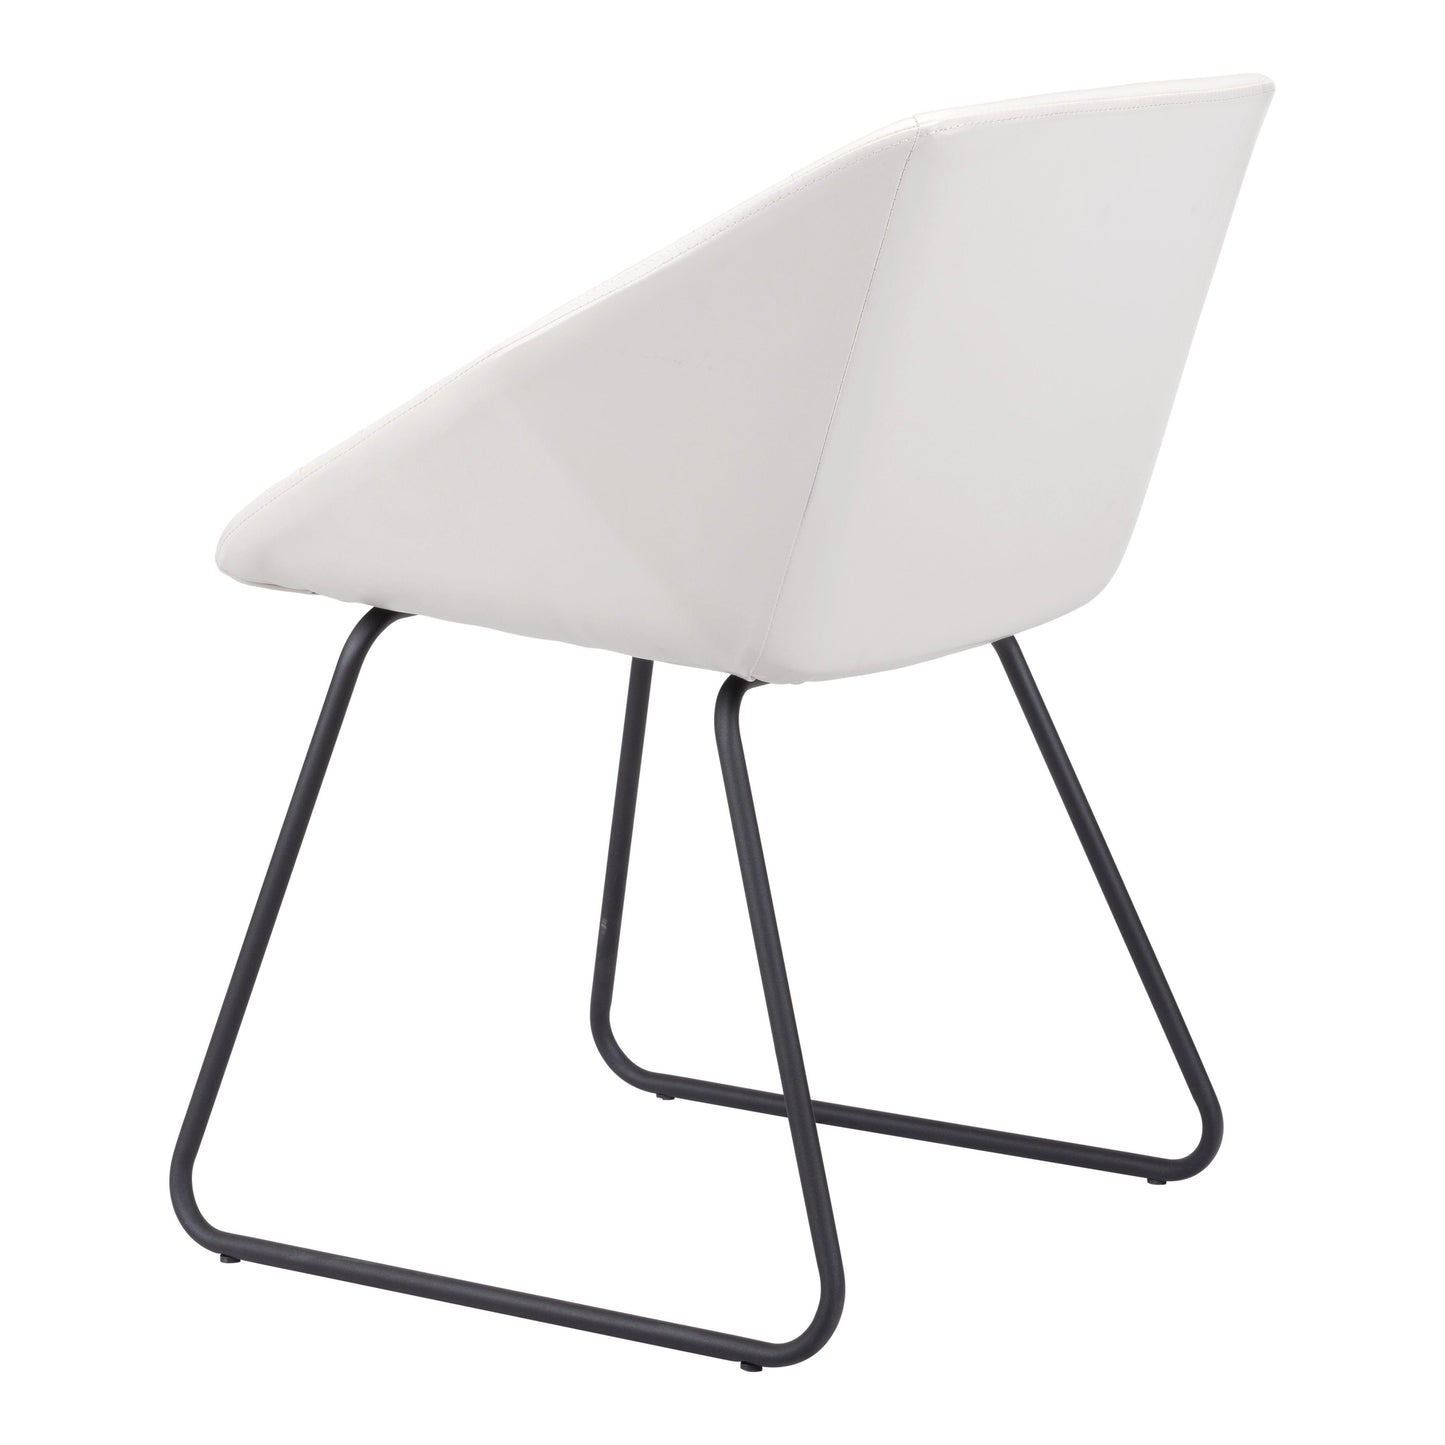 Miguel Dining Chair (Set of 2) White - Sideboards and Things Back Type_With Back, Brand_Zuo Modern, Color_Black, Color_White, Depth_20-30, Finish_Powder Coated, Height_30-40, Materials_Metal, Materials_Upholstery, Materials_Wood, Metal Type_Steel, Number of Pieces_2PC Set, Product Type_Dining Height, Upholstery Type_Leather, Upholstery Type_Vegan Leather, Width_20-30, Wood Species_Plywood